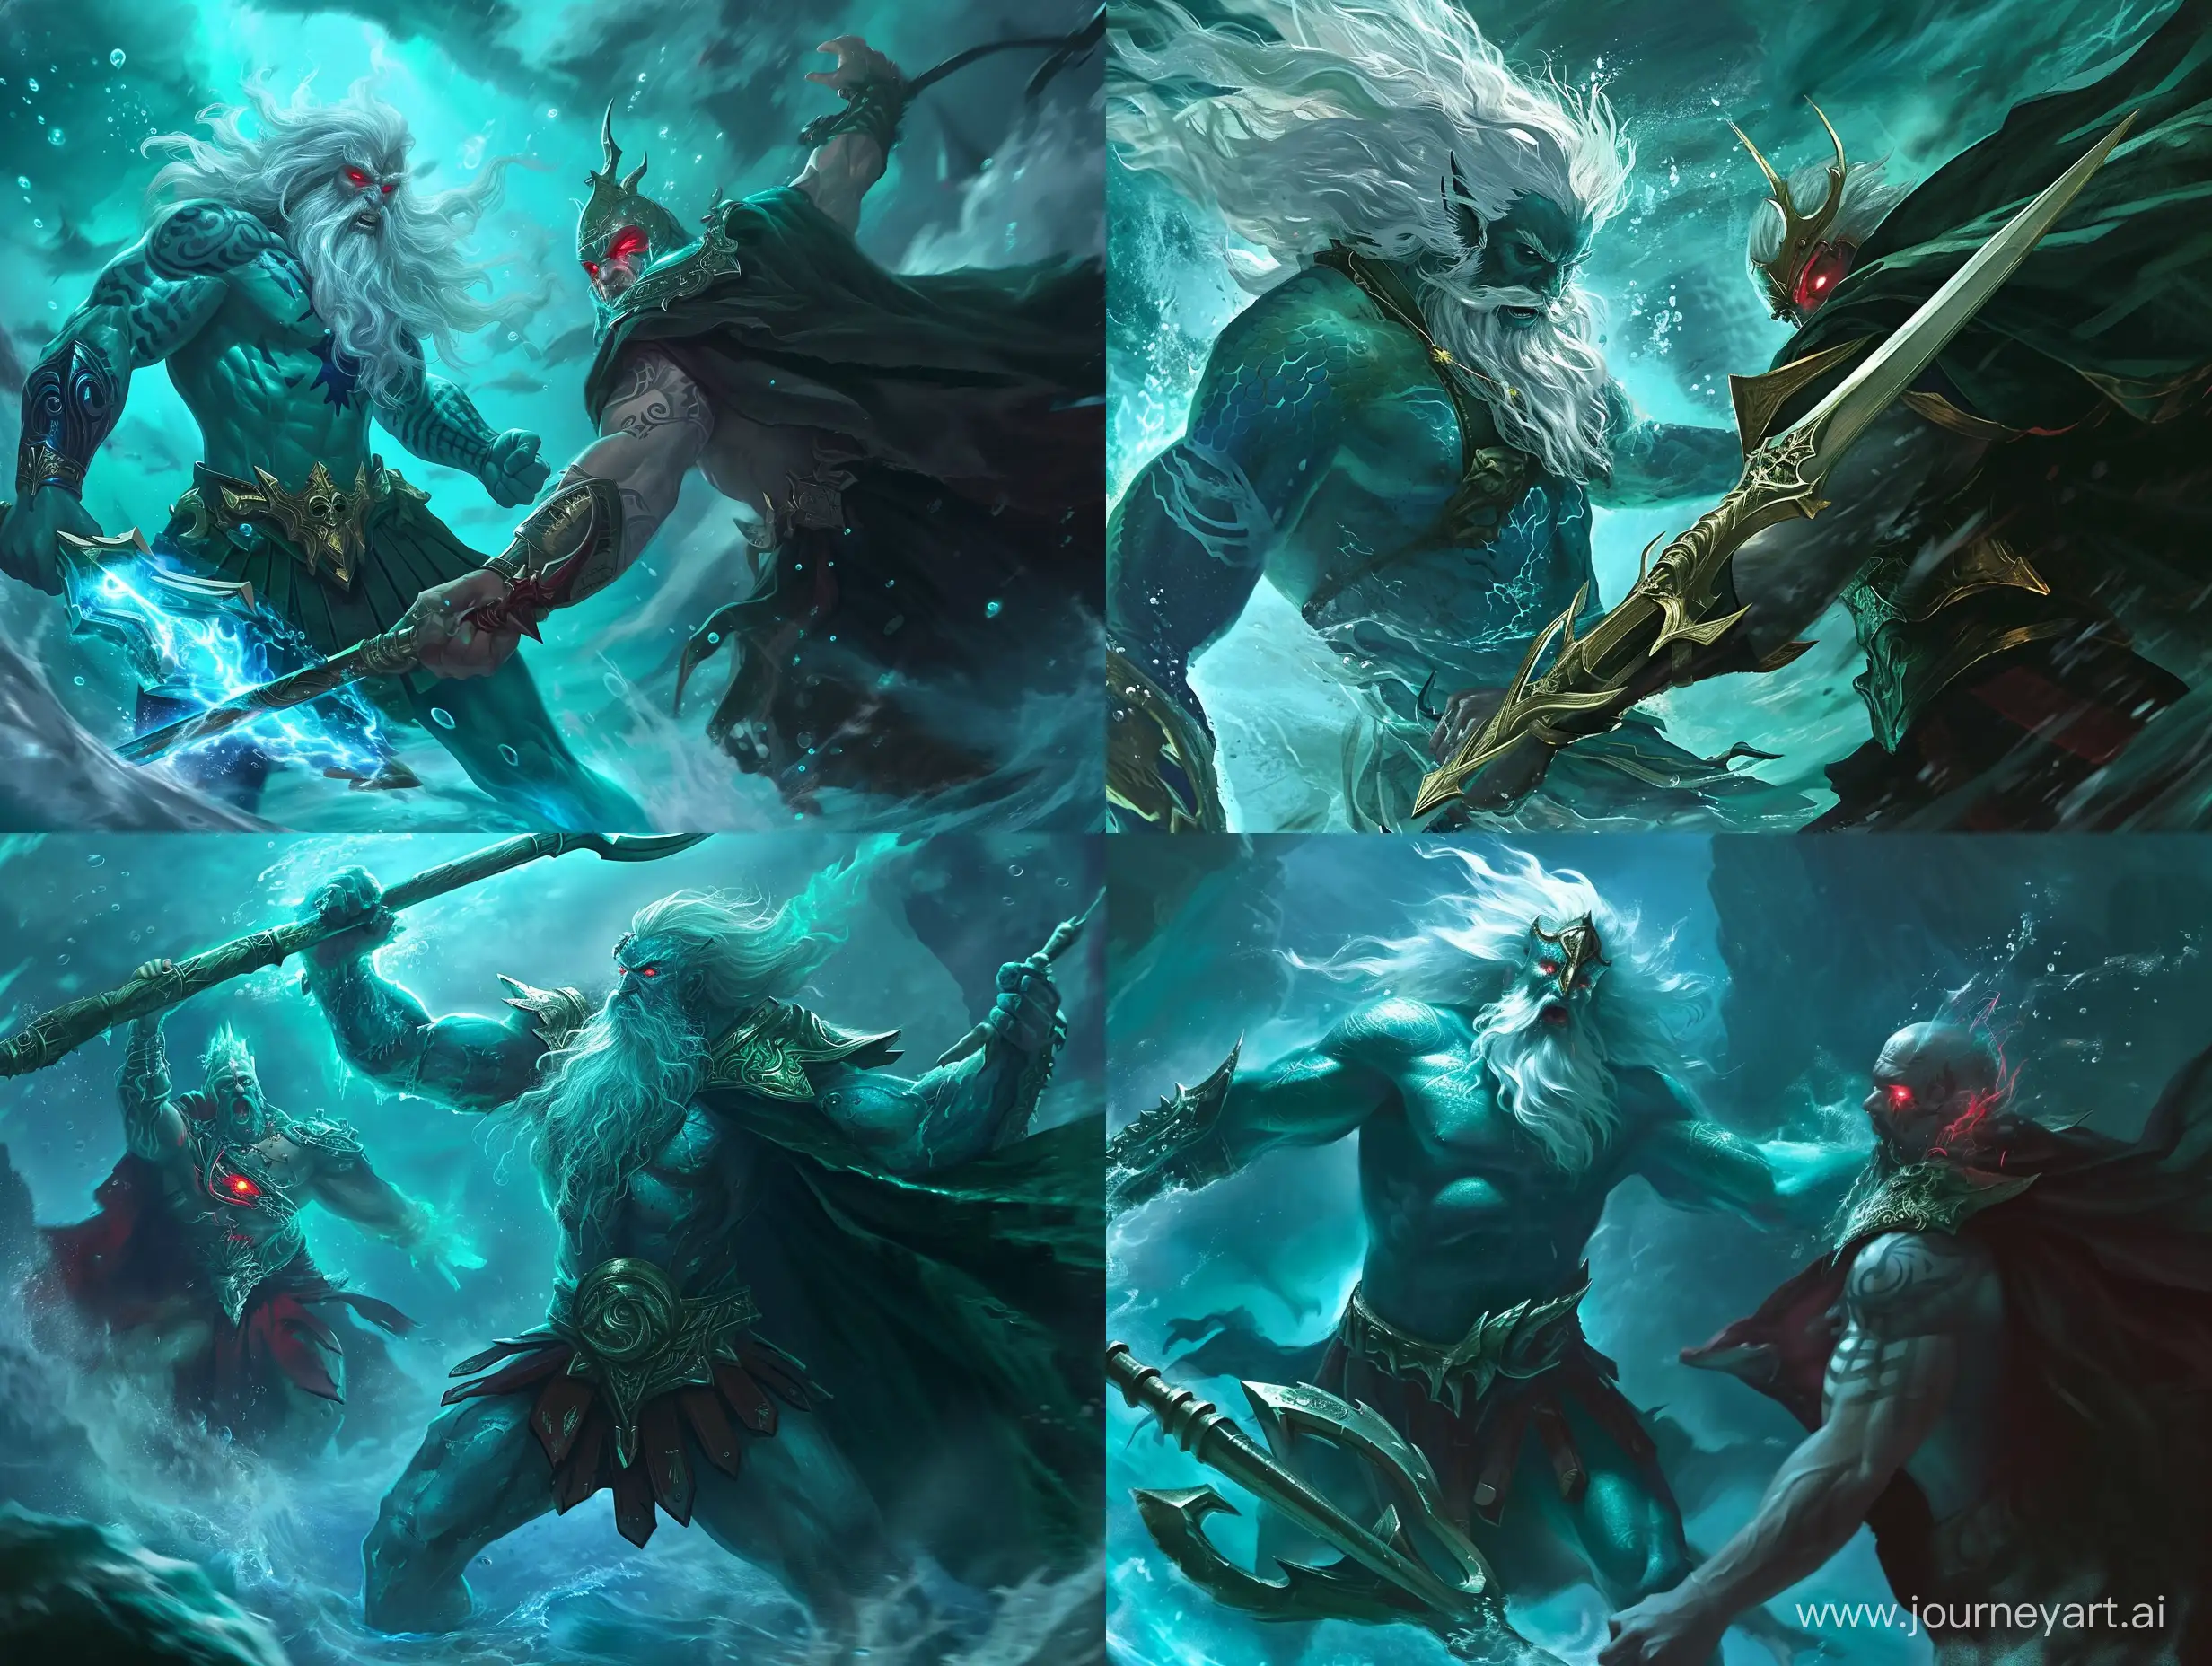 Epic-Undersea-Battle-Poseidon-vs-Hades-with-Trident-and-Sword